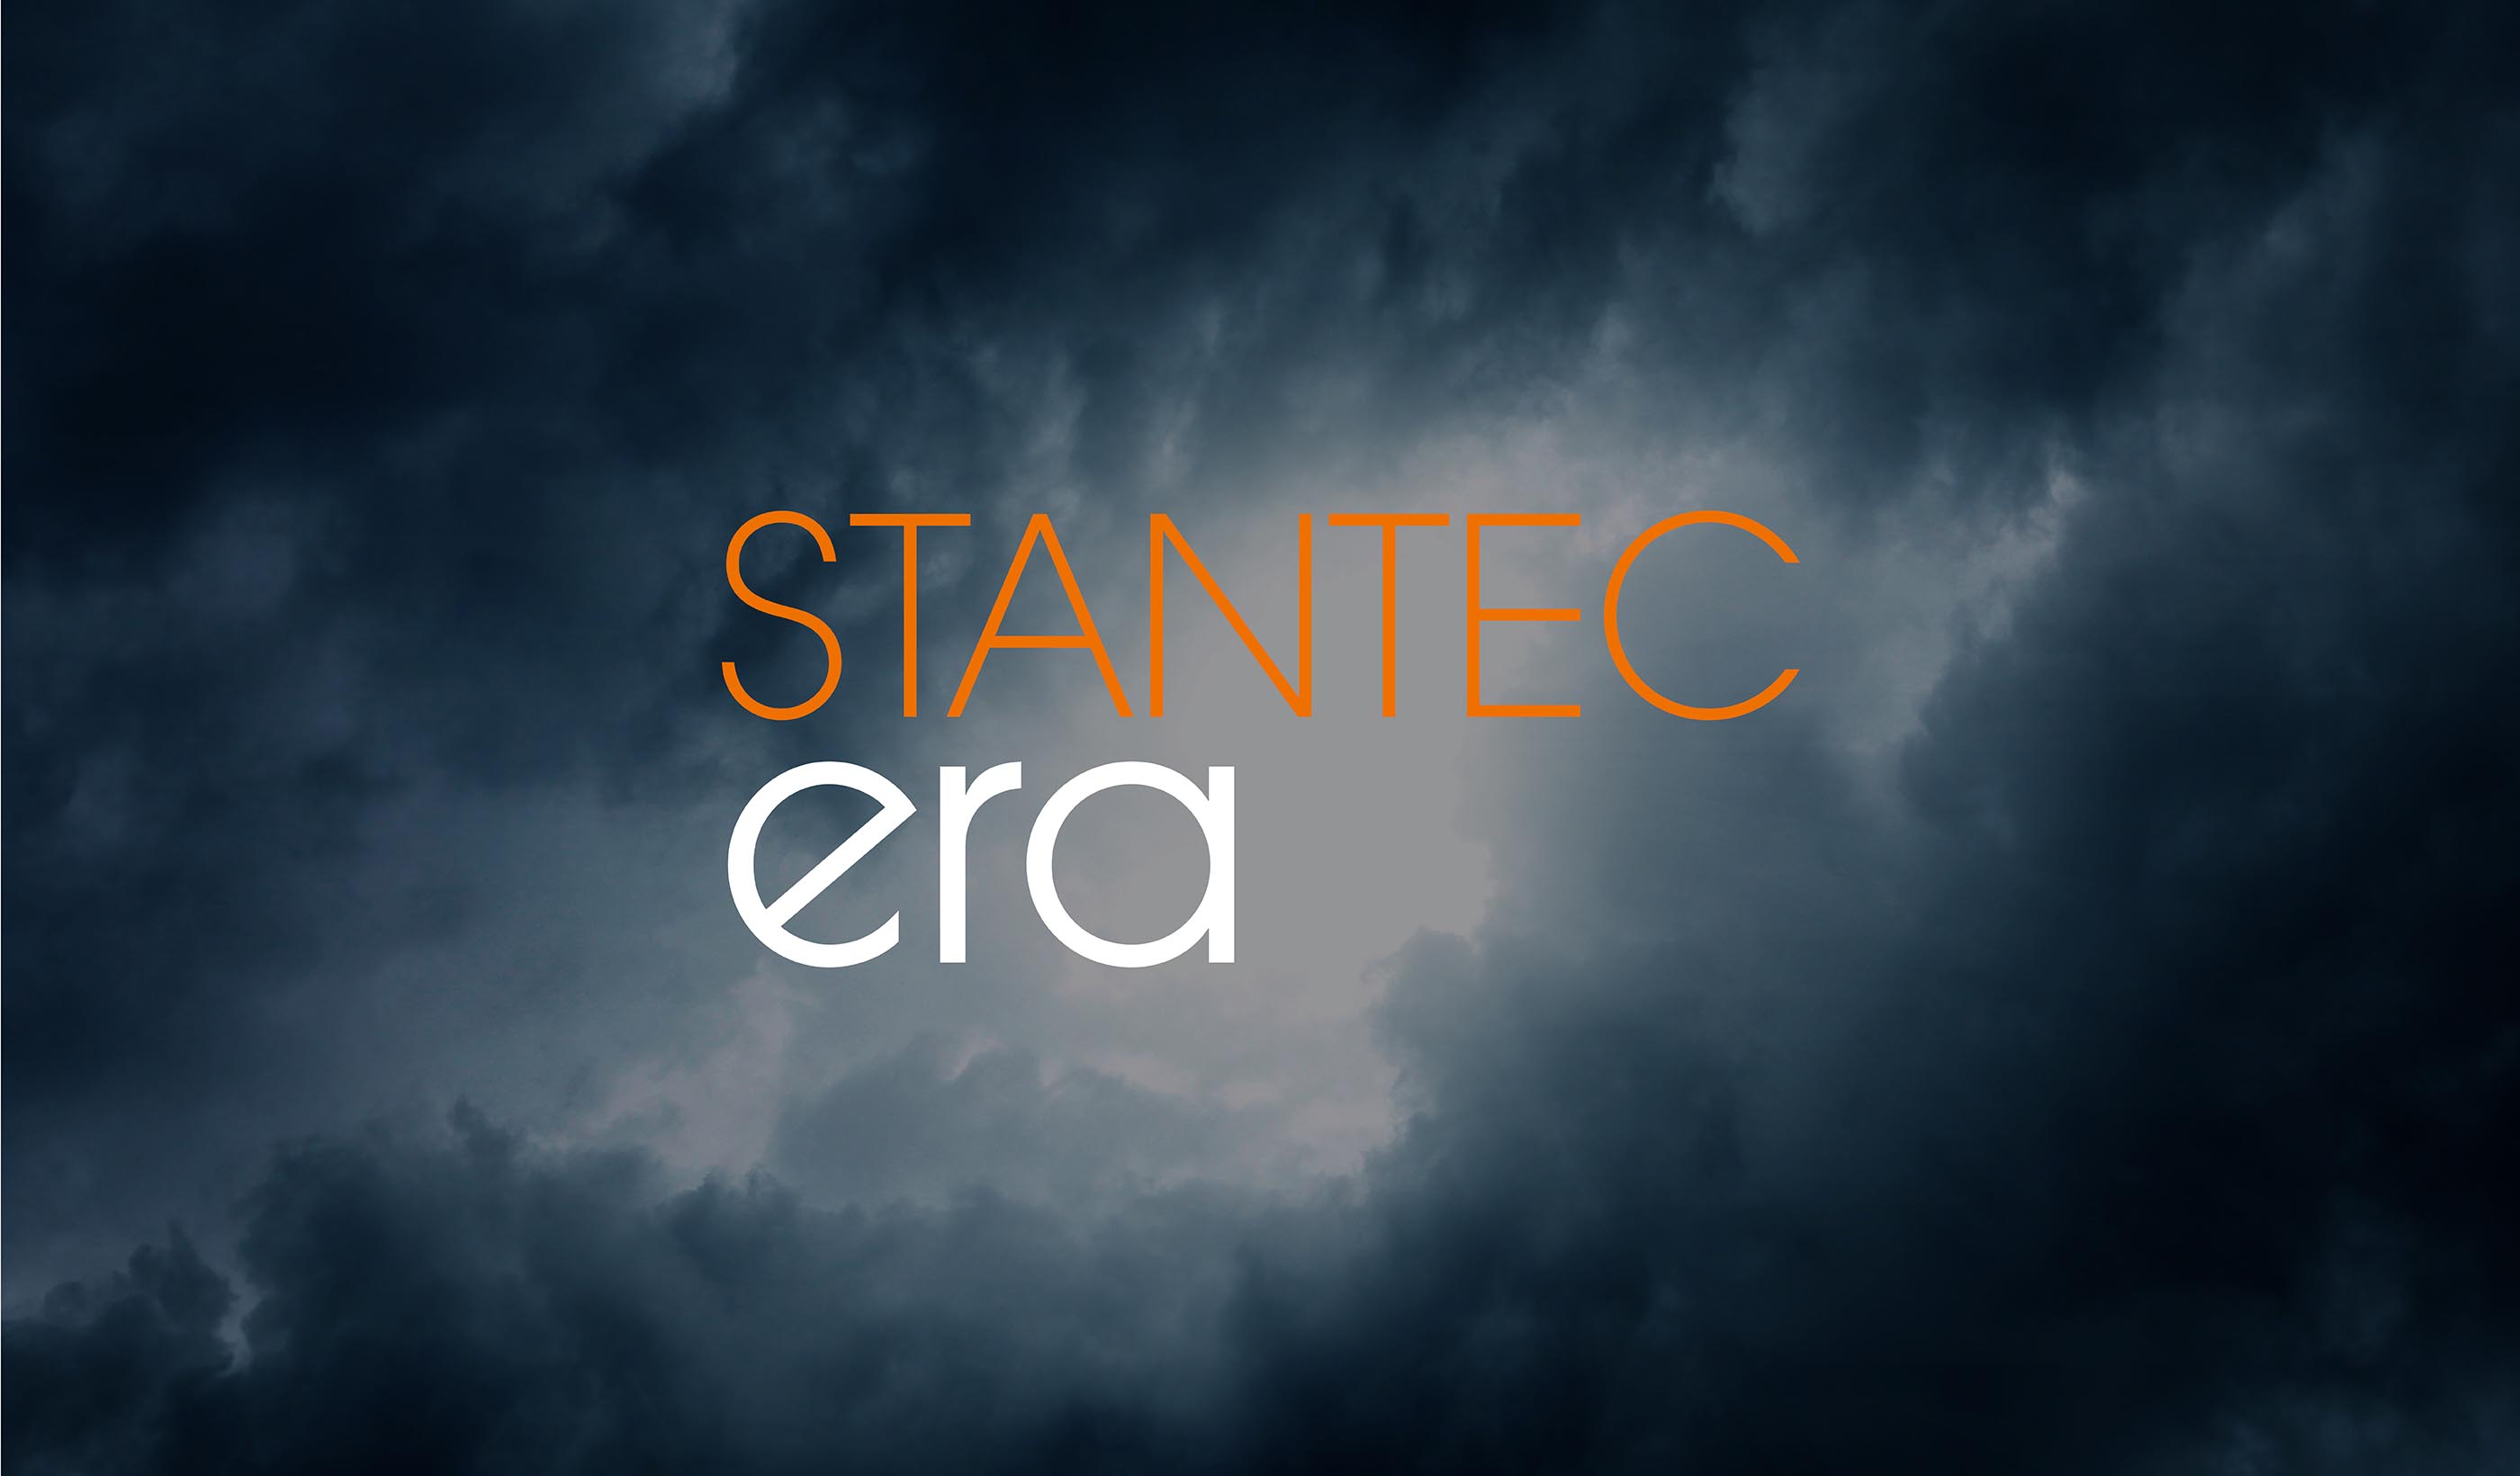 Stantec ERA Issue 8 | The Extreme Weather Issue